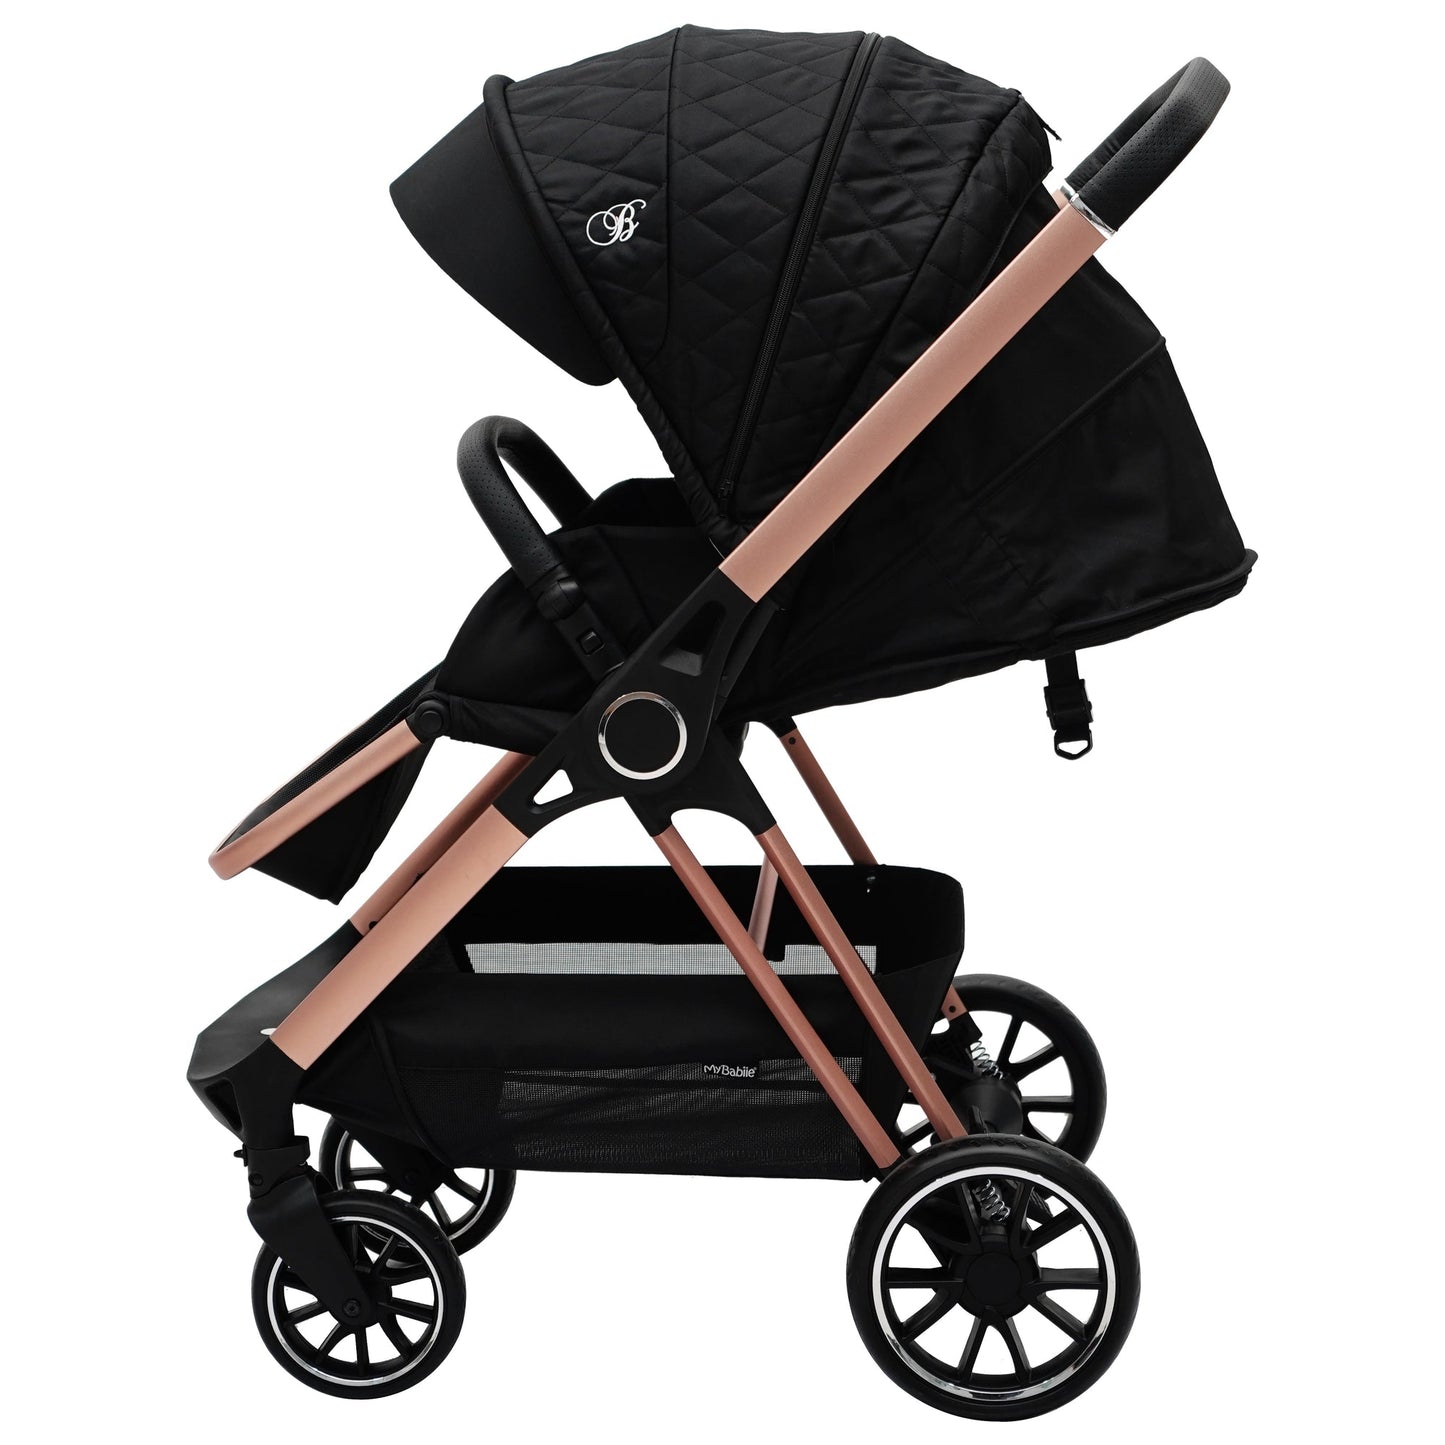 My Babiie MB250i Billie Faiers iSize Travel System